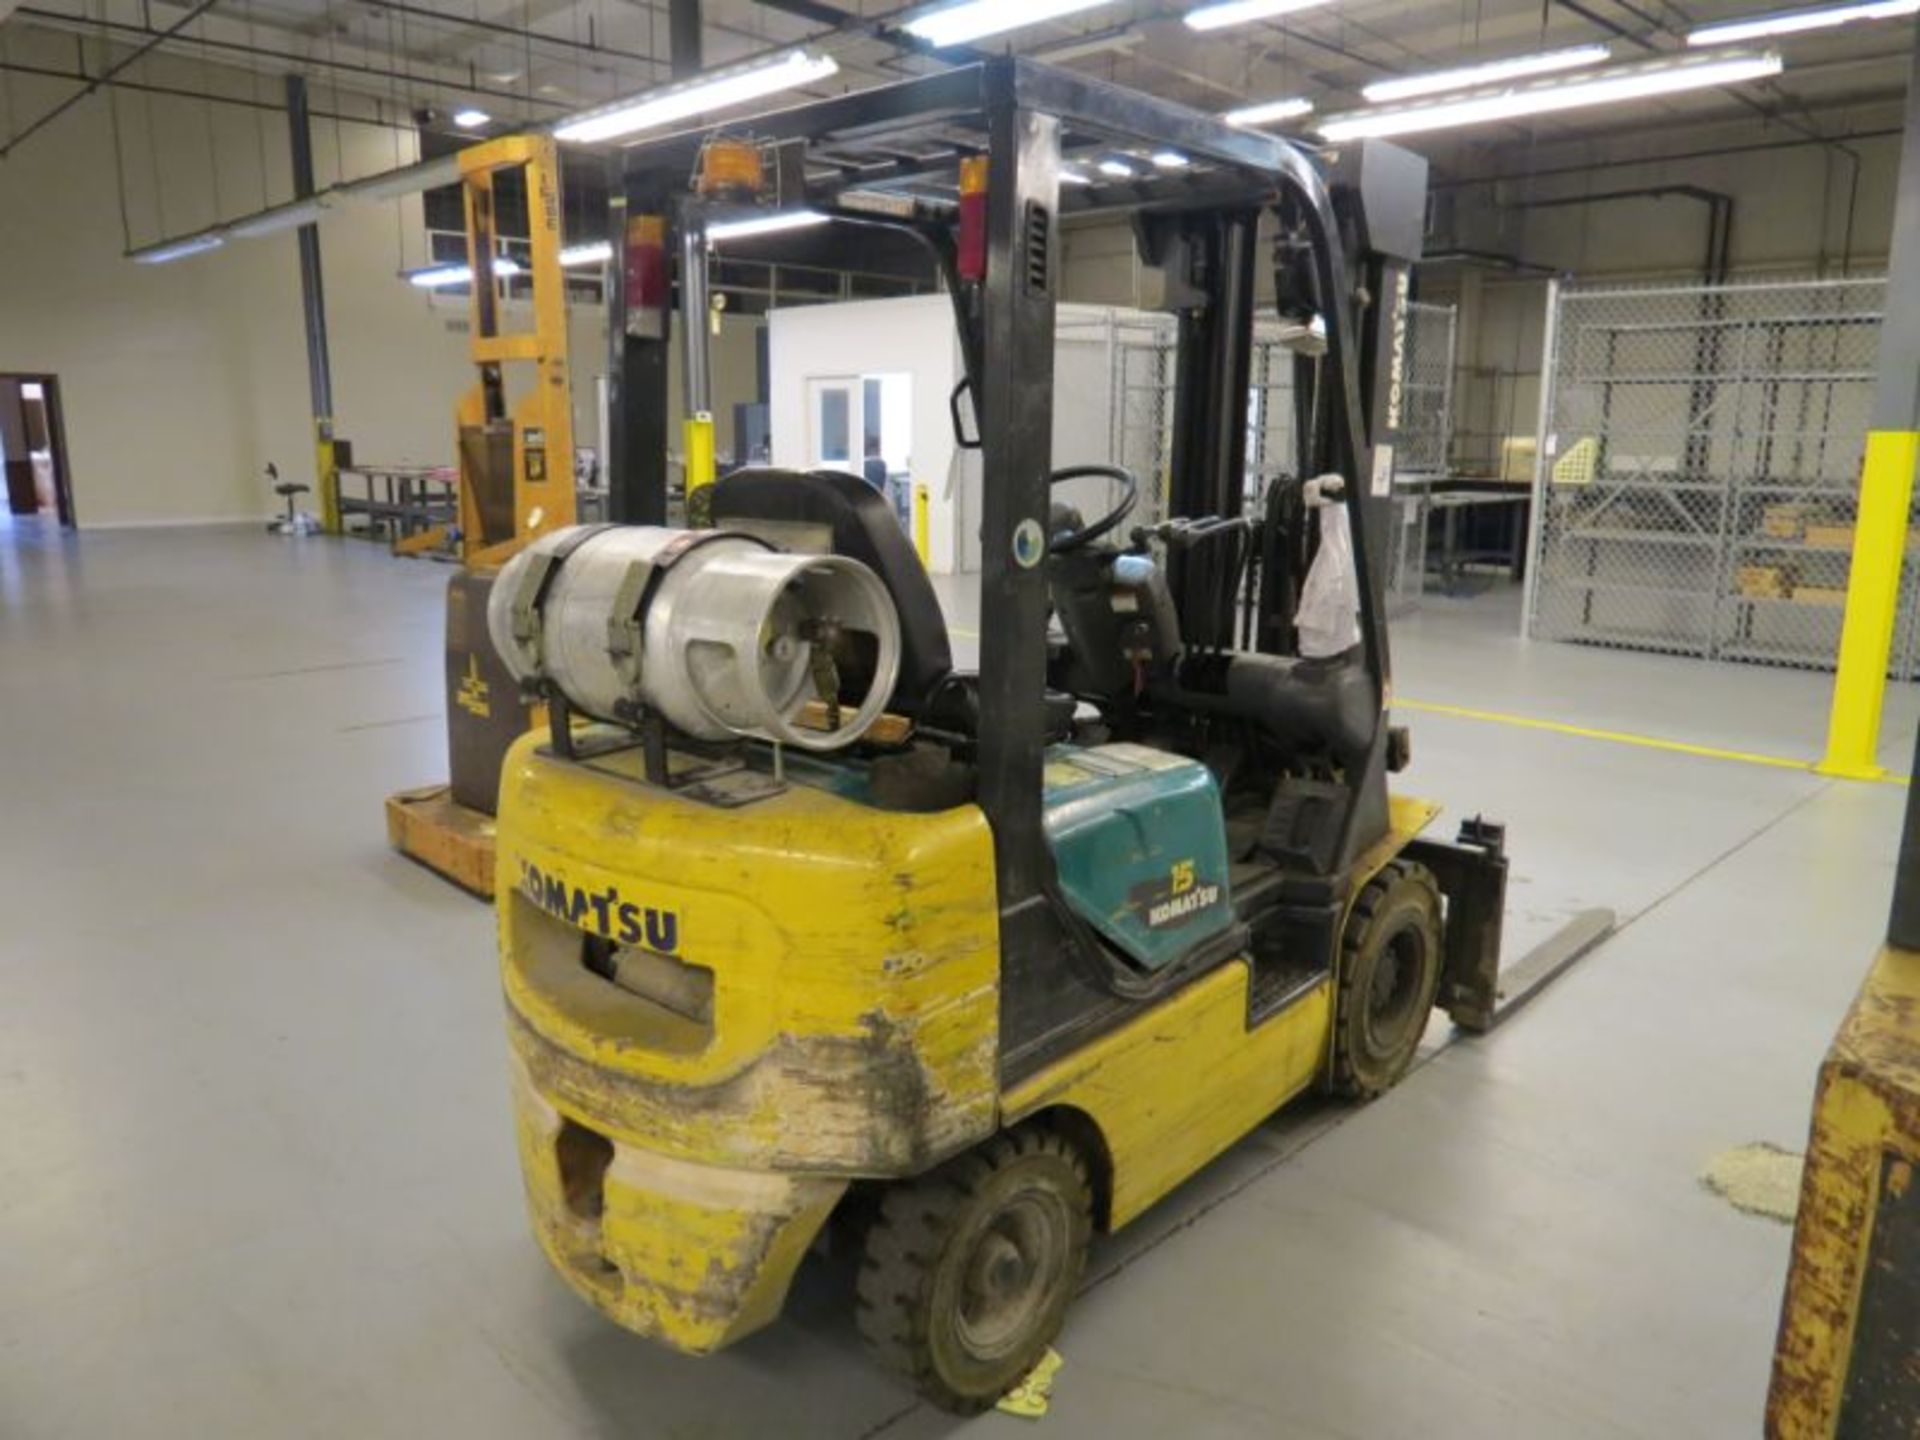 Komatsu FG15HT-17 Fork Lift, capacity 4000lbs, late s/n 671902A, hours: 0344926, (Late Delivery) - Image 3 of 4